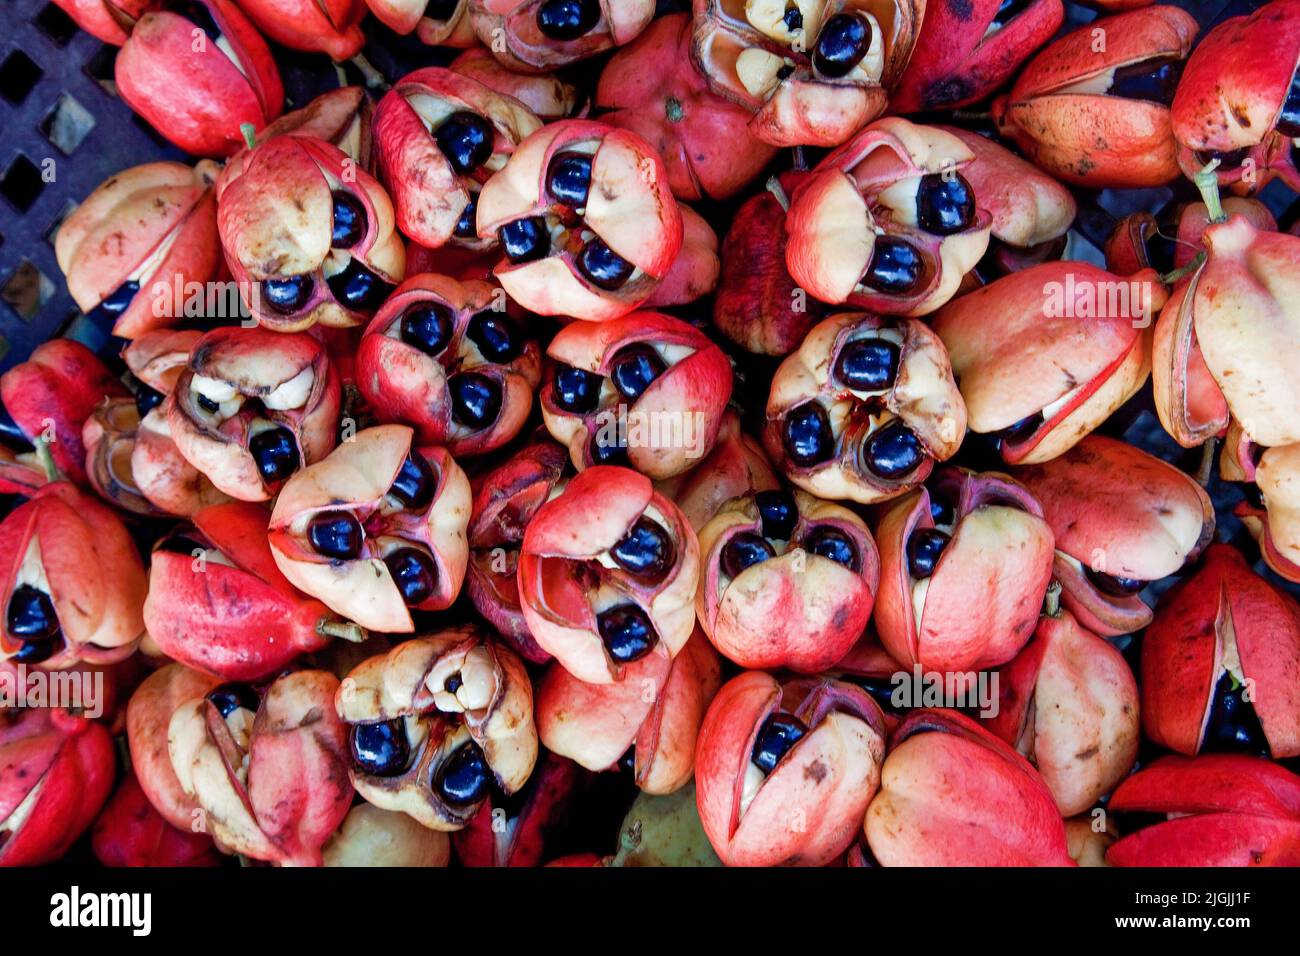 Jamaica, Ocho Rios, Ackee fruit is sold on the market. Ackee is the national fruit used as ingredient in the national dish saltfish. The ackee, also k Stock Photo